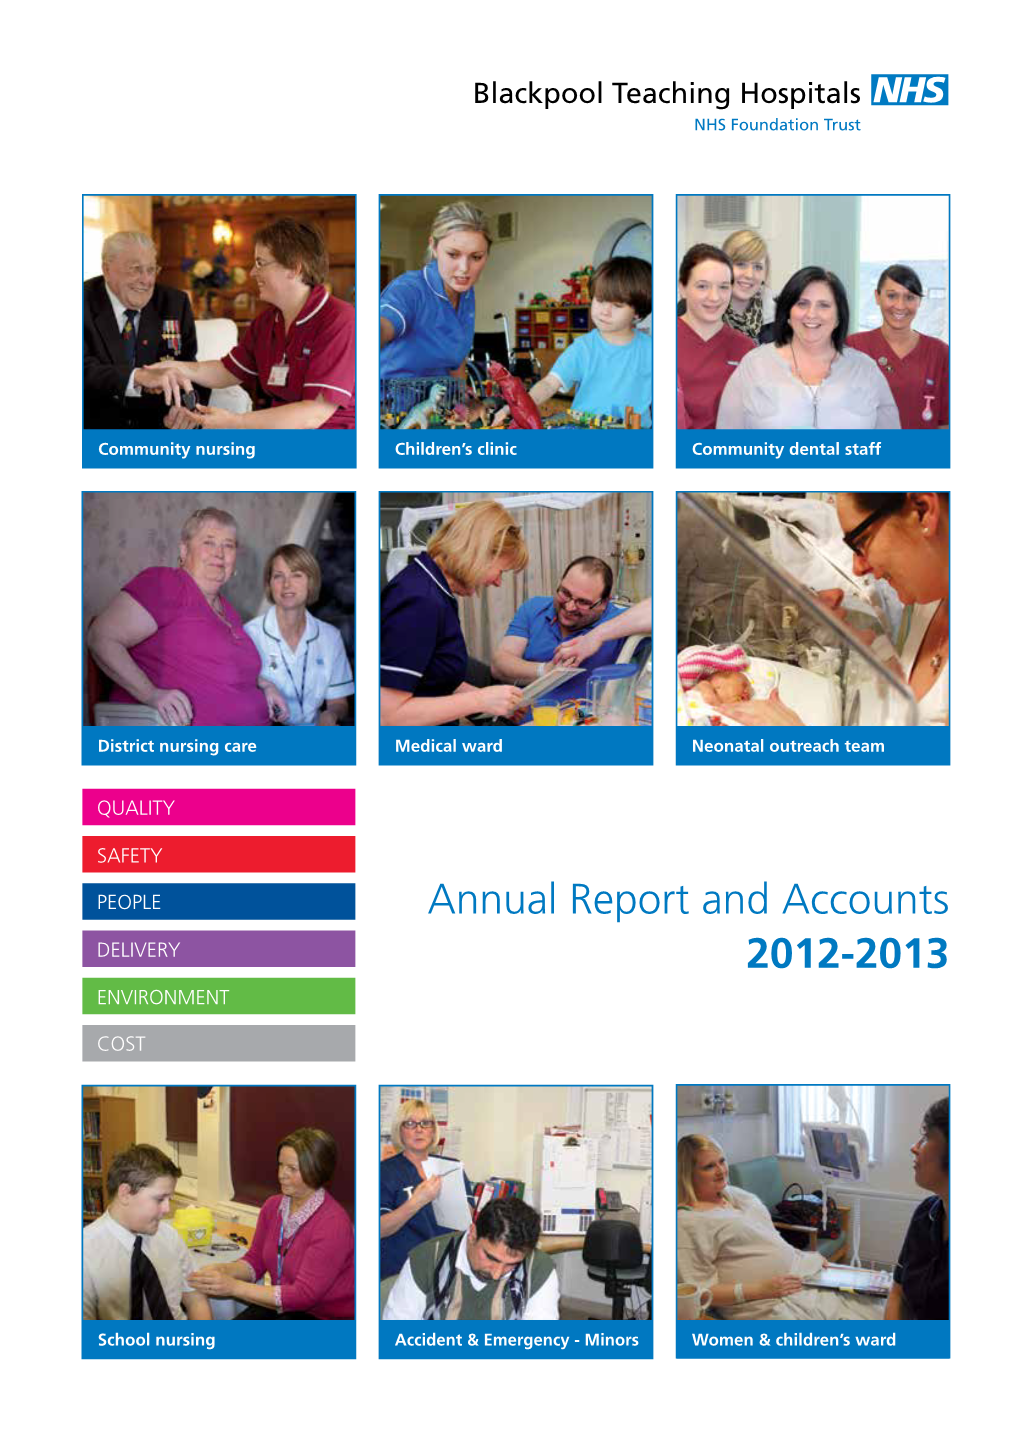 Annual Report and Accounts 2012-2013